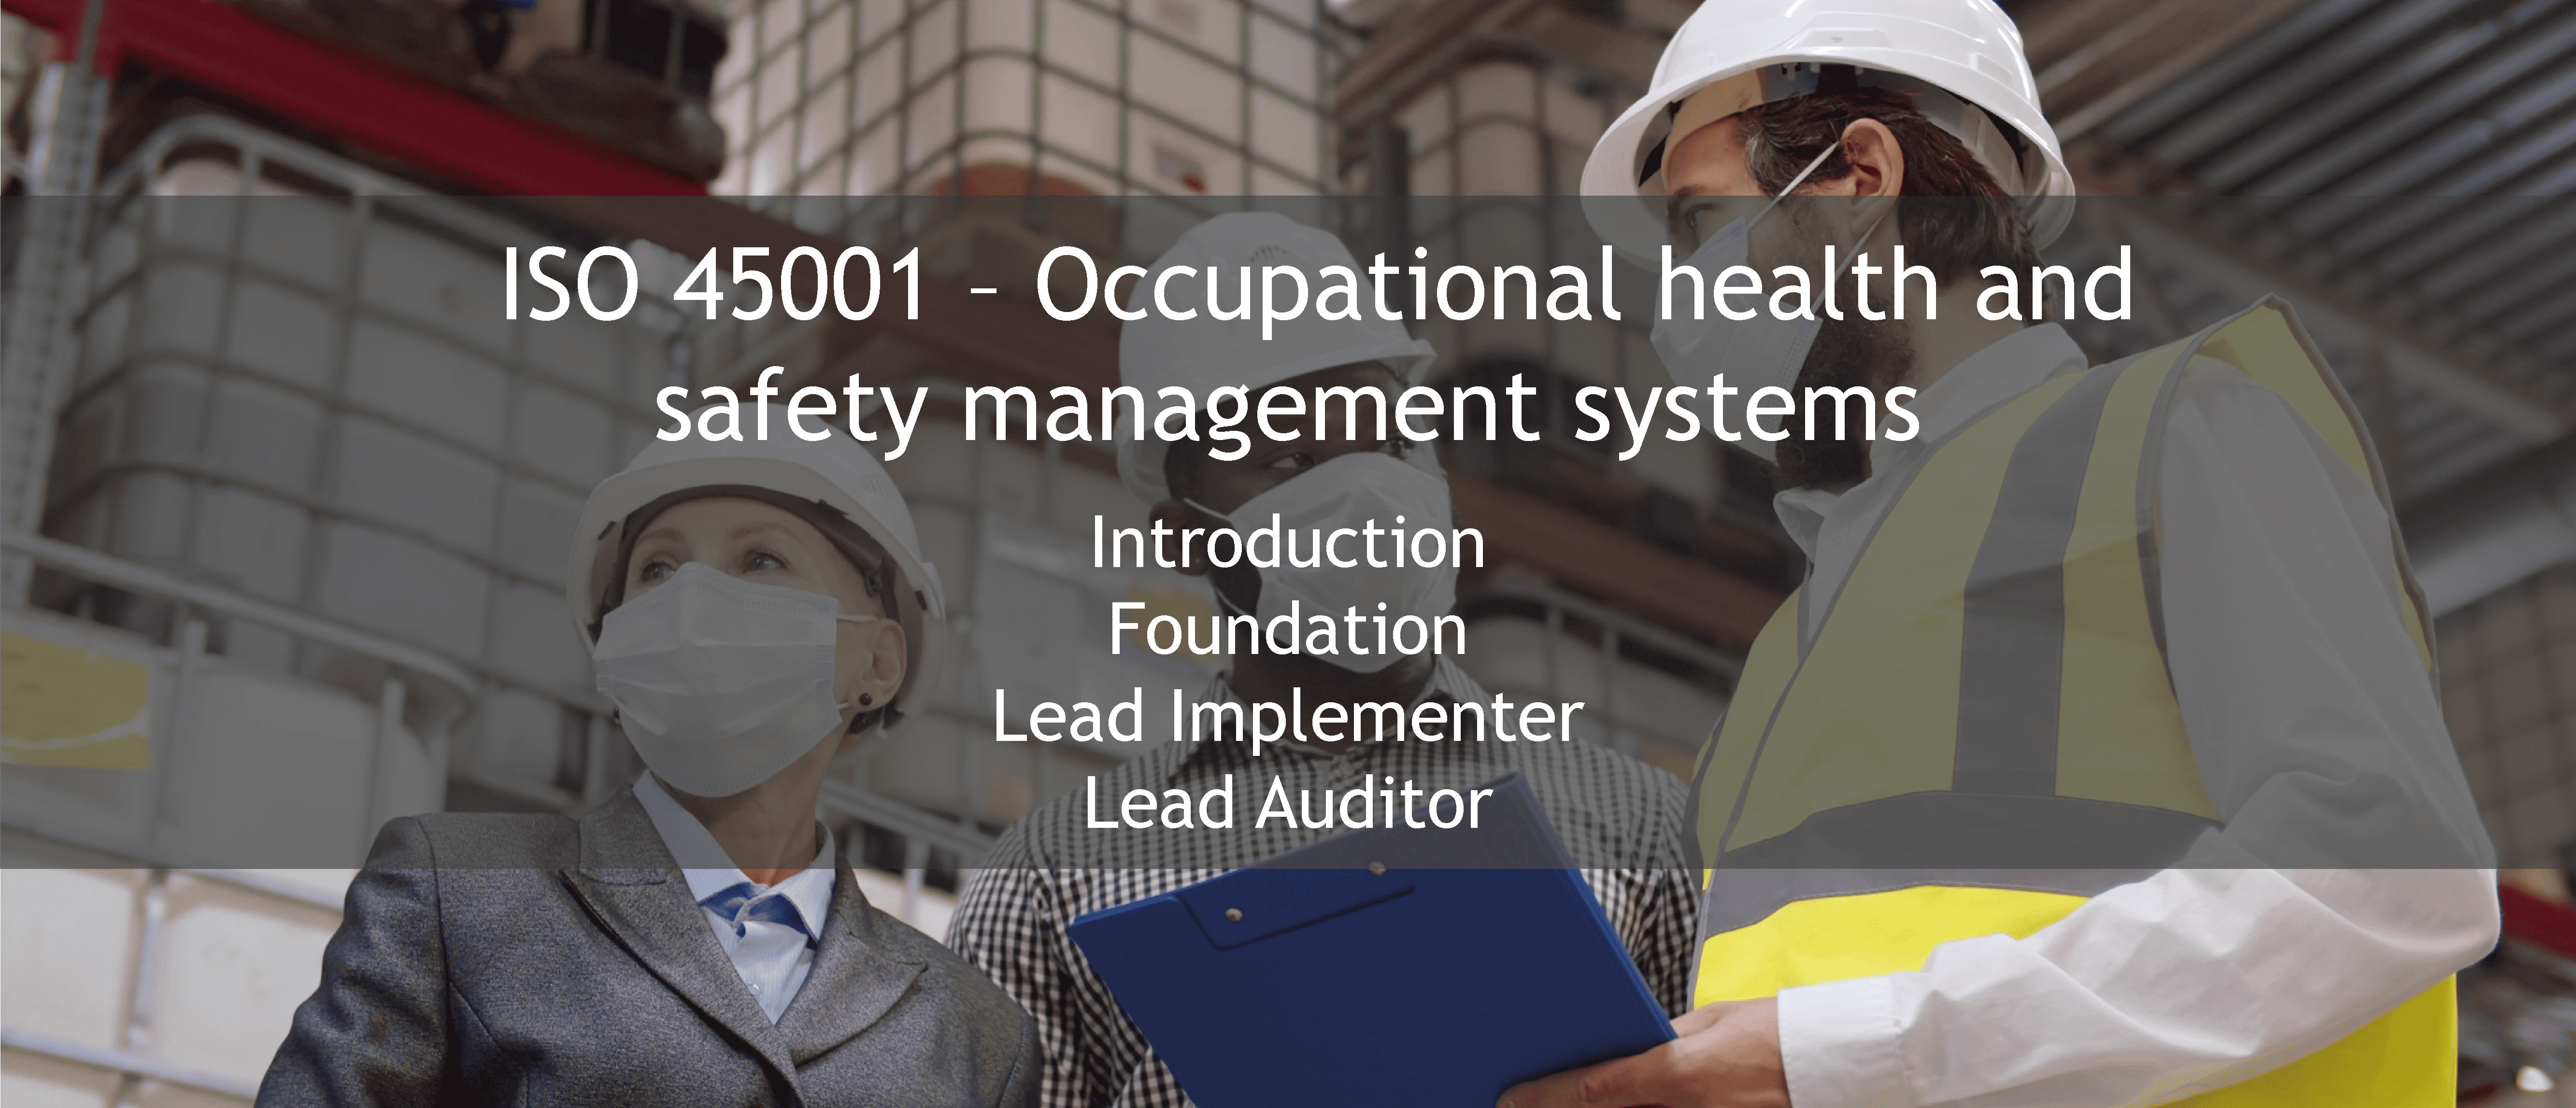 ISO 45001 training offer - Training solutions